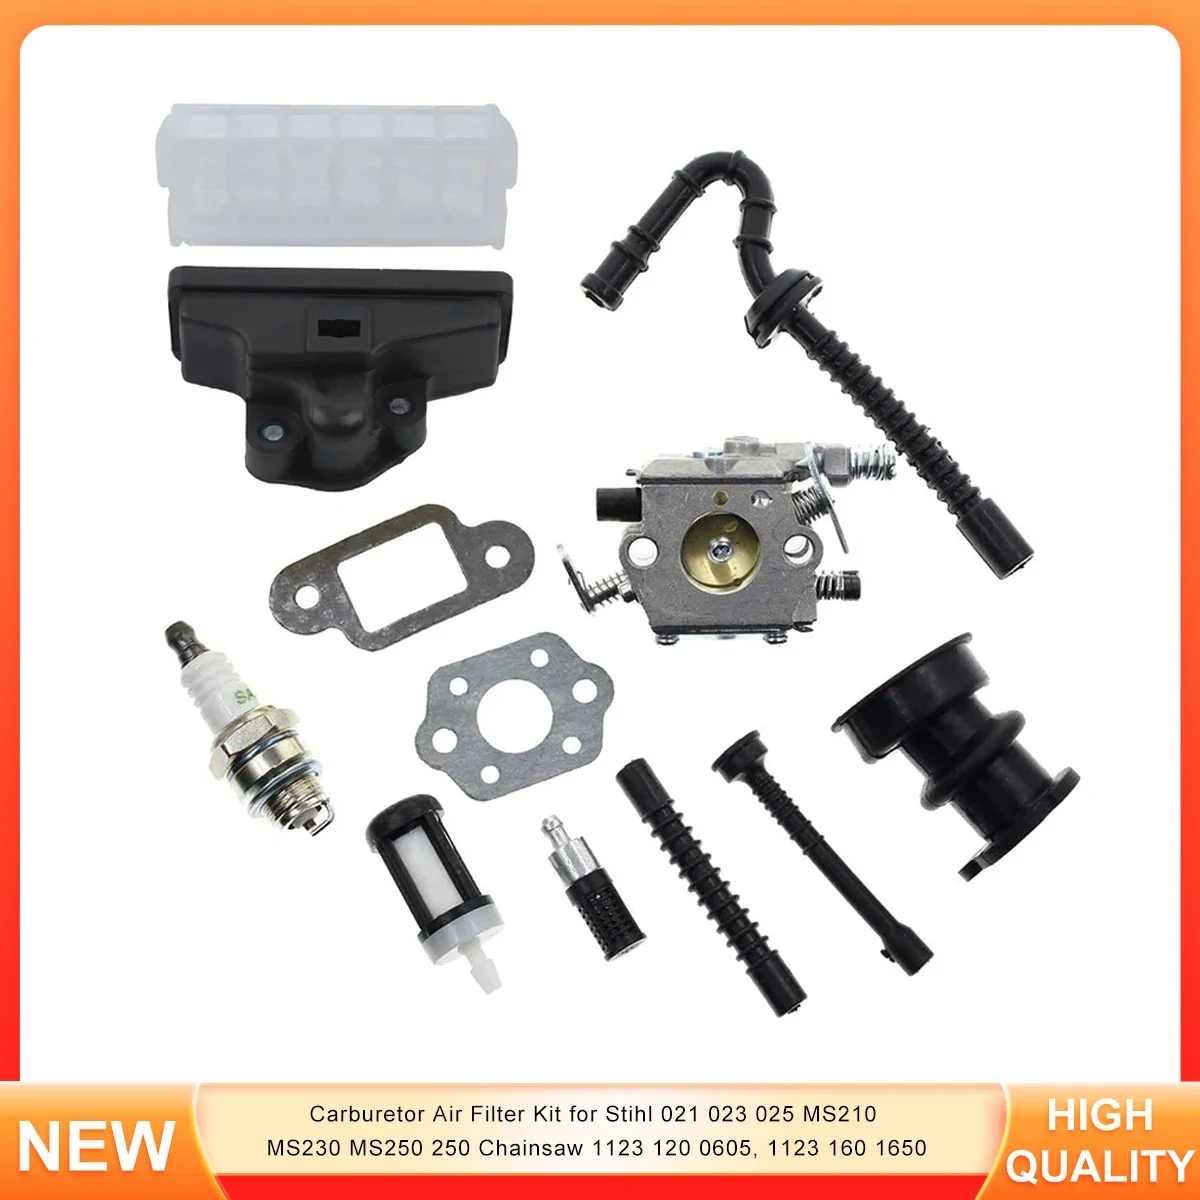 

Carburetor Air Filter Kit for Stihl 021 023 025 MS210 MS230 MS250 250 Chainsaw 1123 120 0605, 1123 160 1650